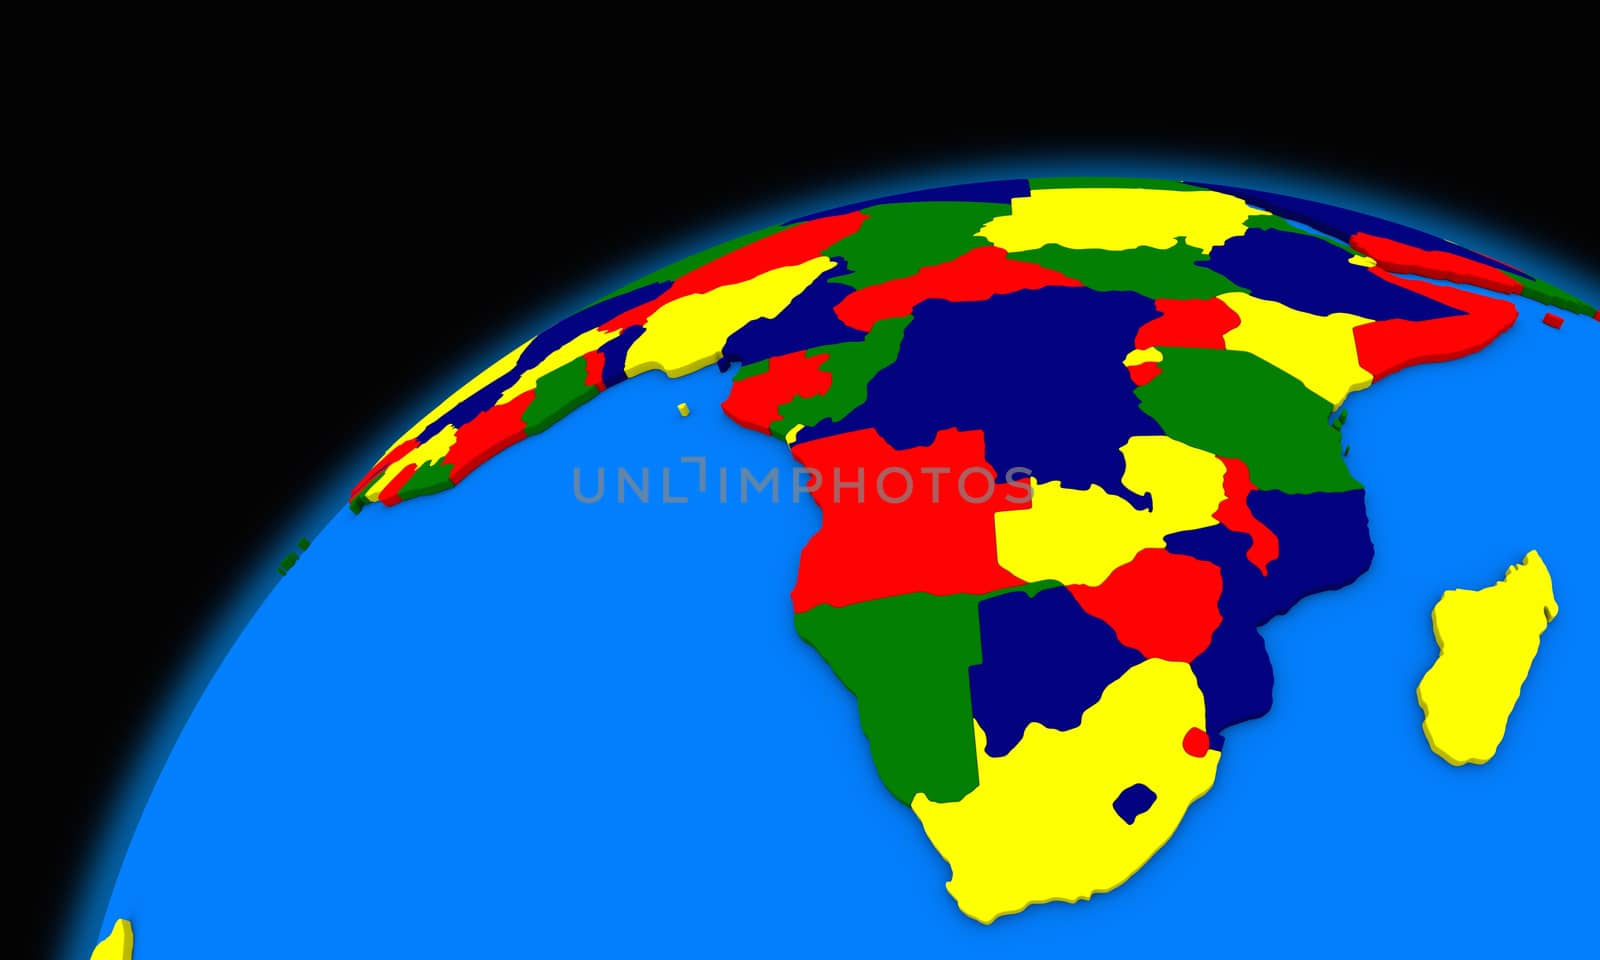 south Africa on planet Earth political map by Harvepino